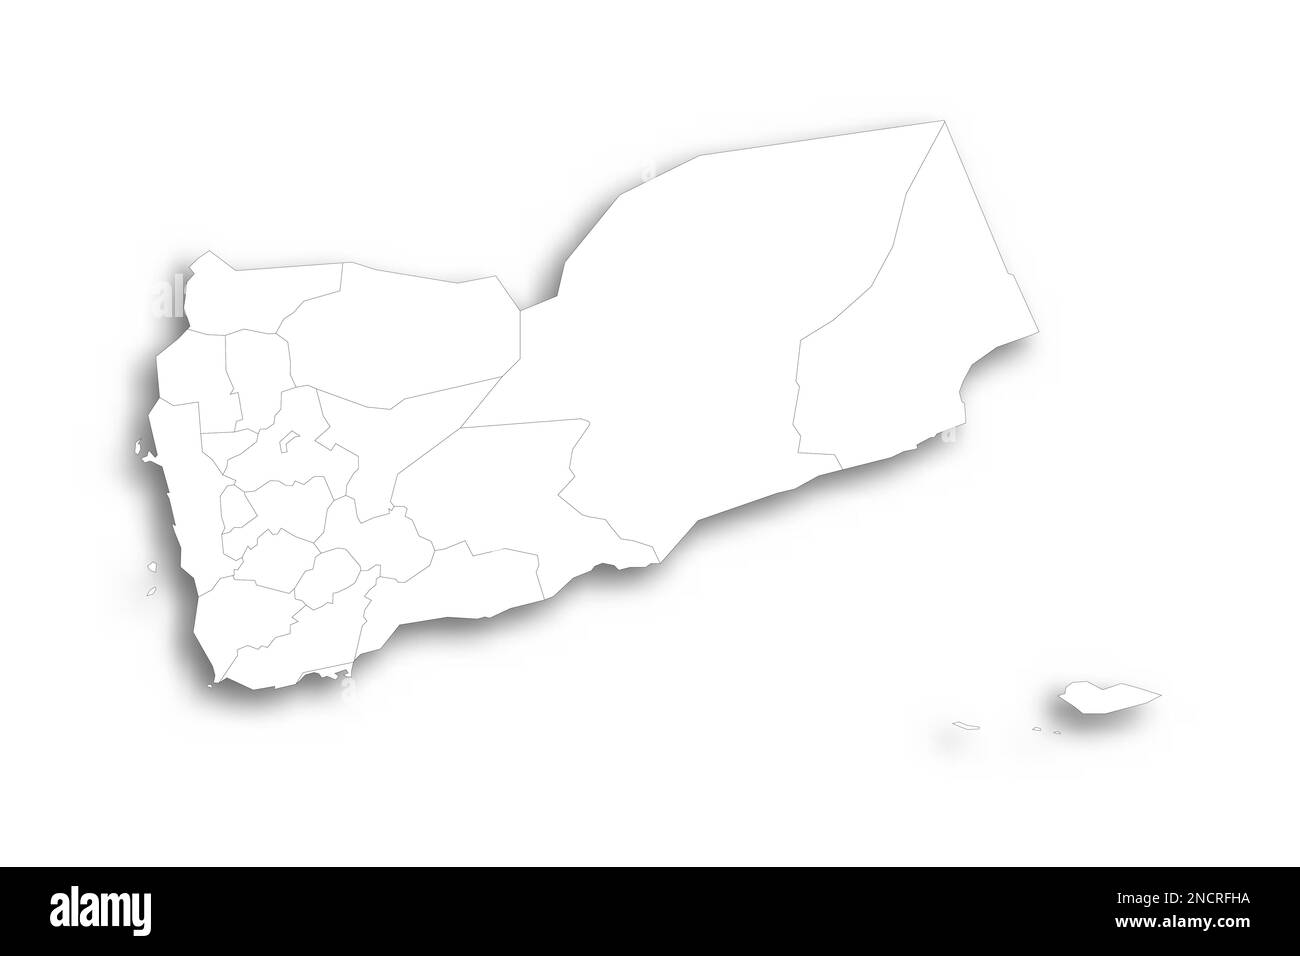 Yemen political map of administrative divisions - governorates and municipality of Sanaa. Flat white blank map with thin black outline and dropped shadow. Stock Vector